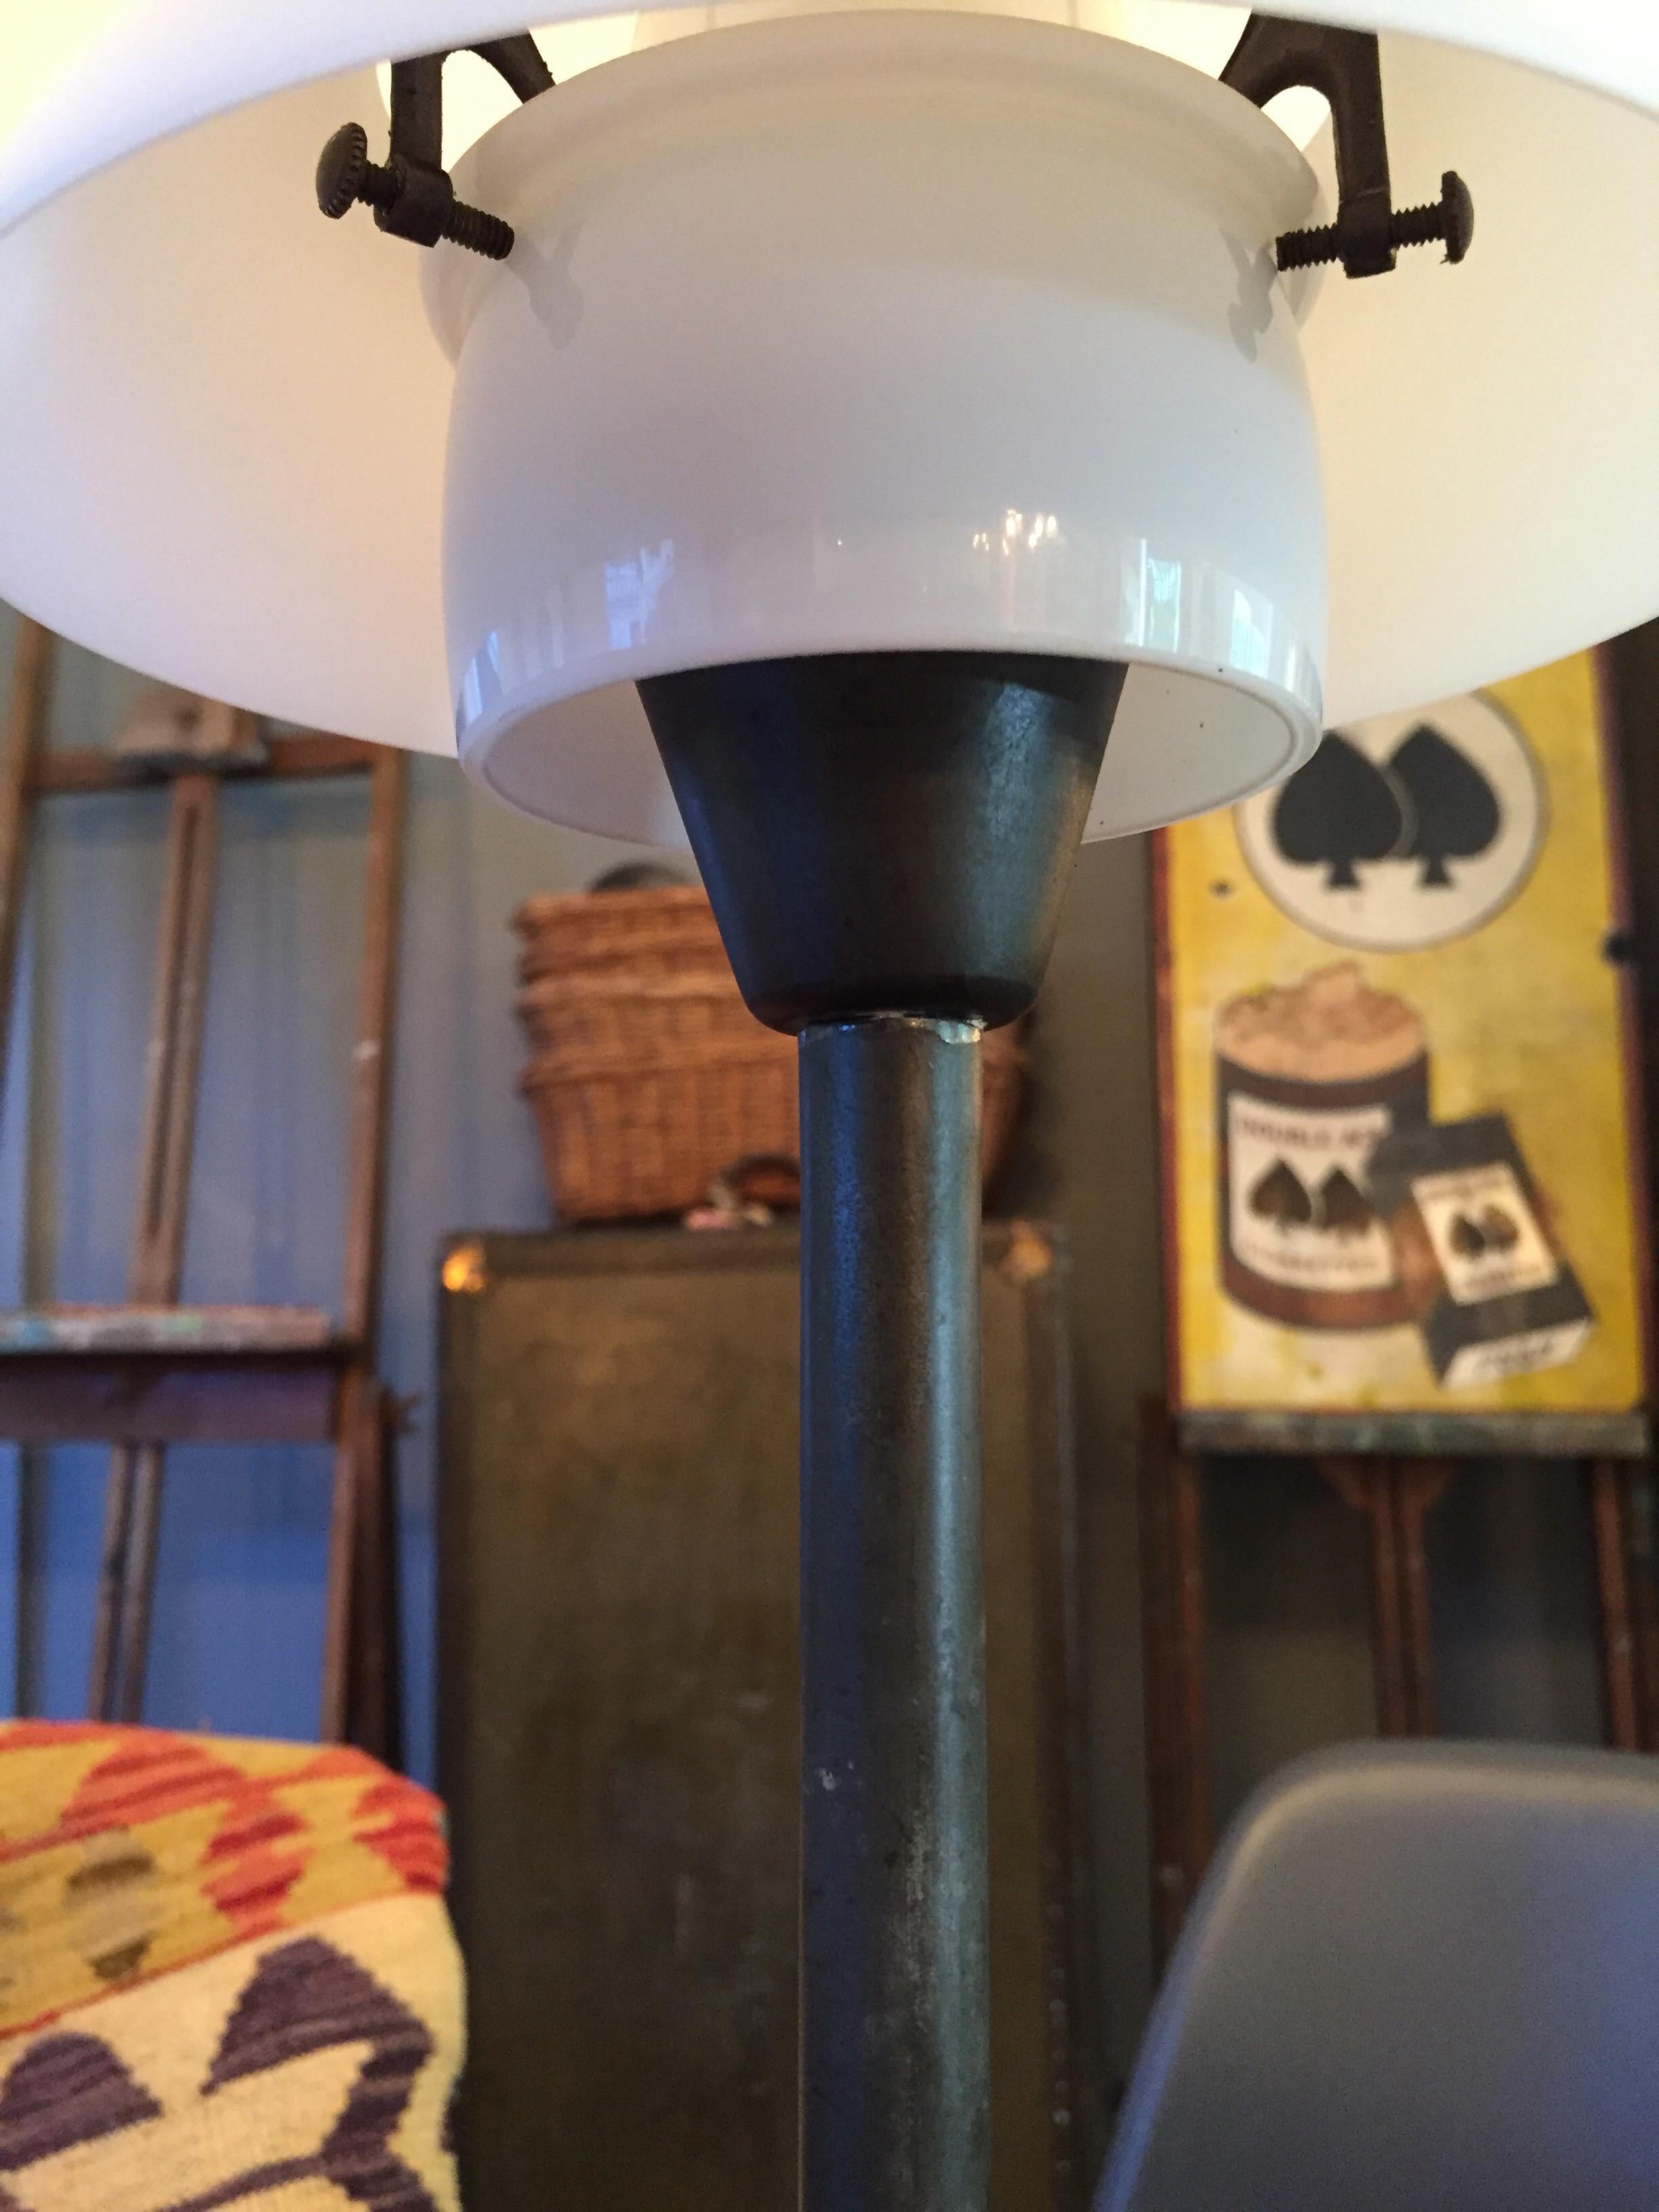 Poul Henningsen 3.5/2 Table Lamp from the 1940s Made by Louis Poulsen of Denmark 2